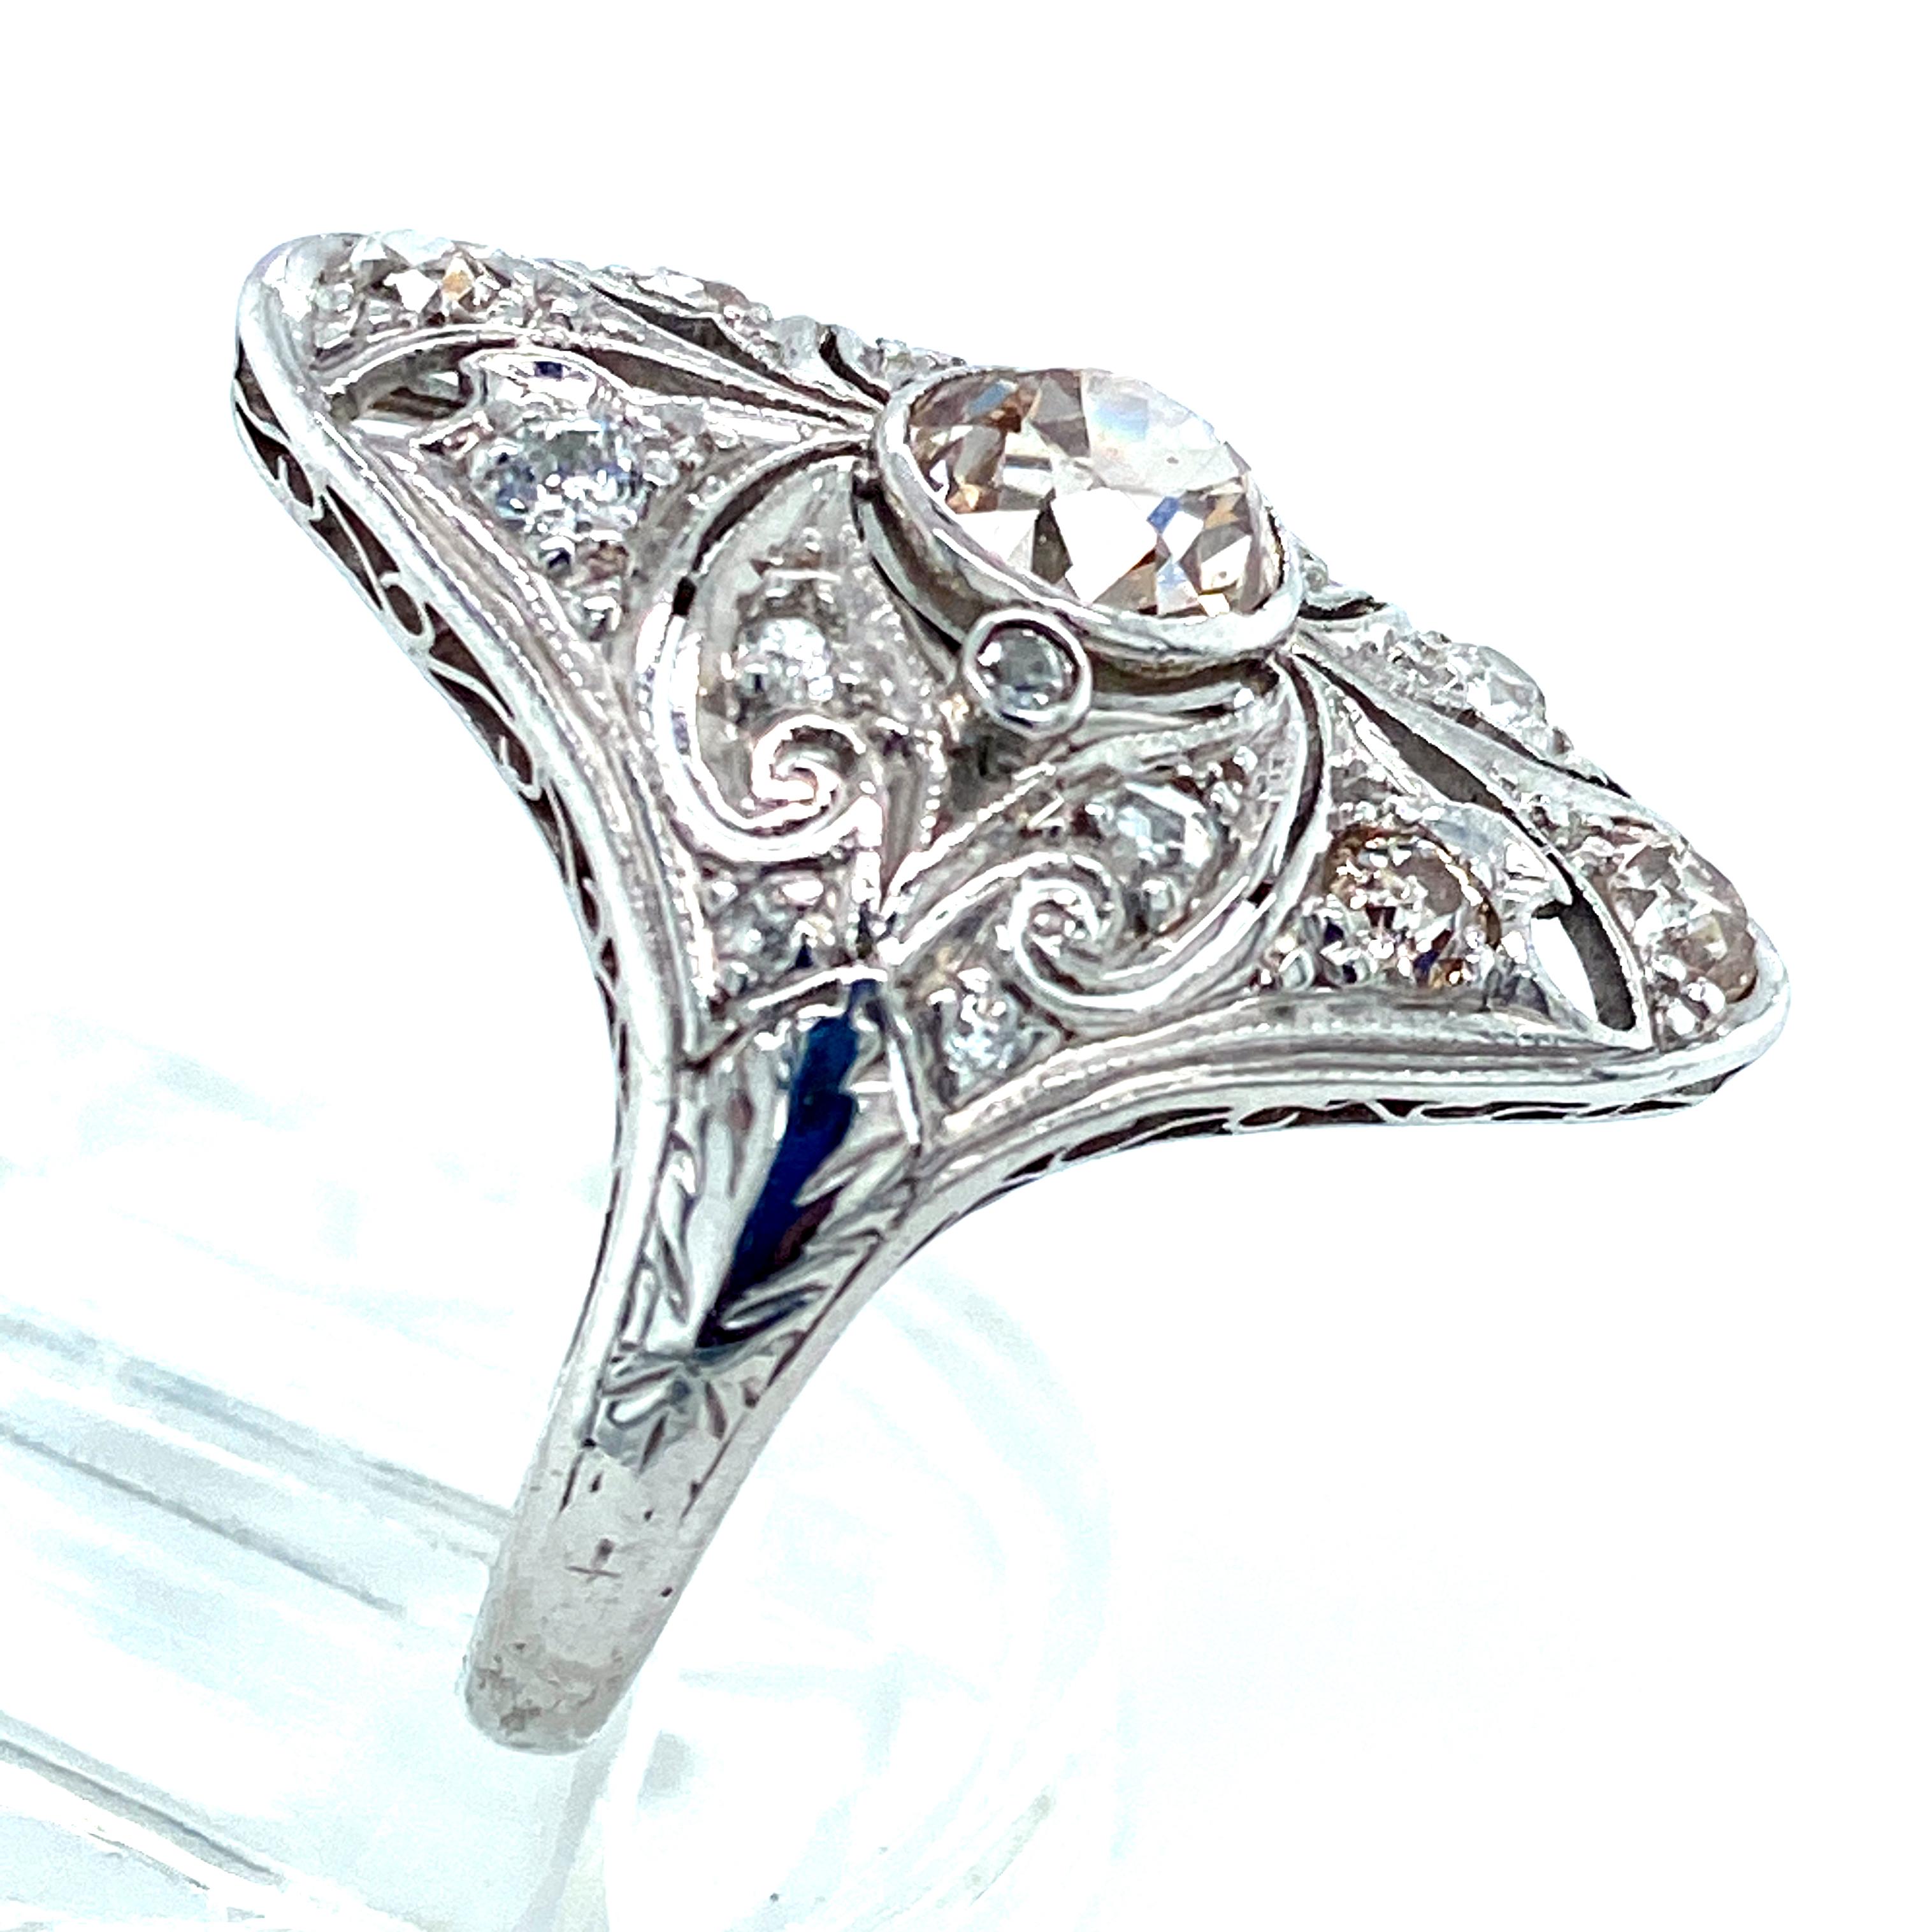 Original Art Deco diamond ring in platinum. The center diamond is a light pinkish-brown weighing approximately .83 carats wtih SI clarity. The other diamonds in the ring are Old European cuts and all the diamonds weigh a total of 1.25 cts with